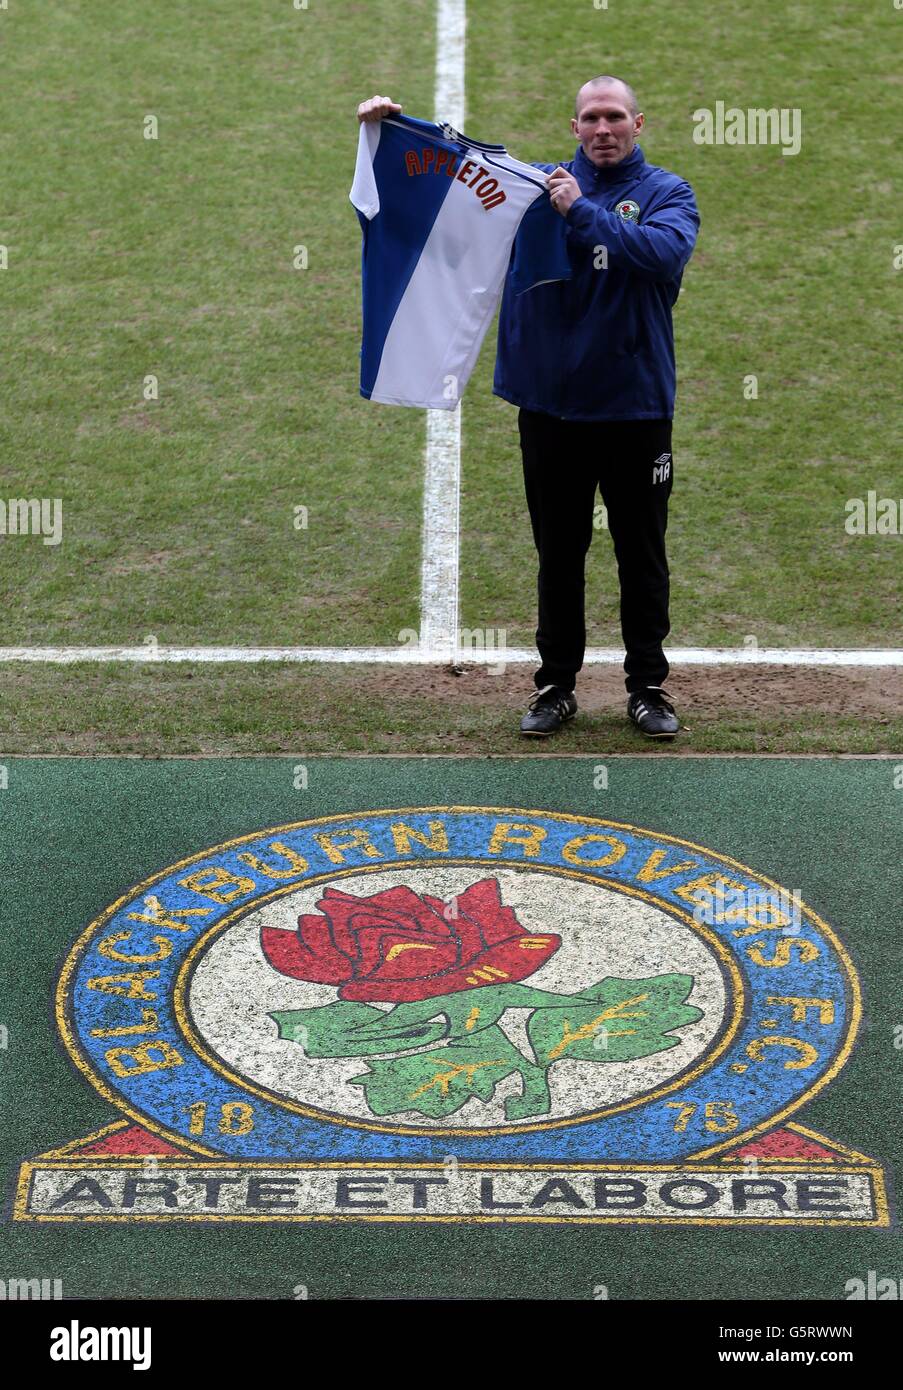 New manager of Blackburn Rovers Michael Appleton poses for photographers after being unveiled as the clubs new manager at Ewood Park, Blackburn. Stock Photo